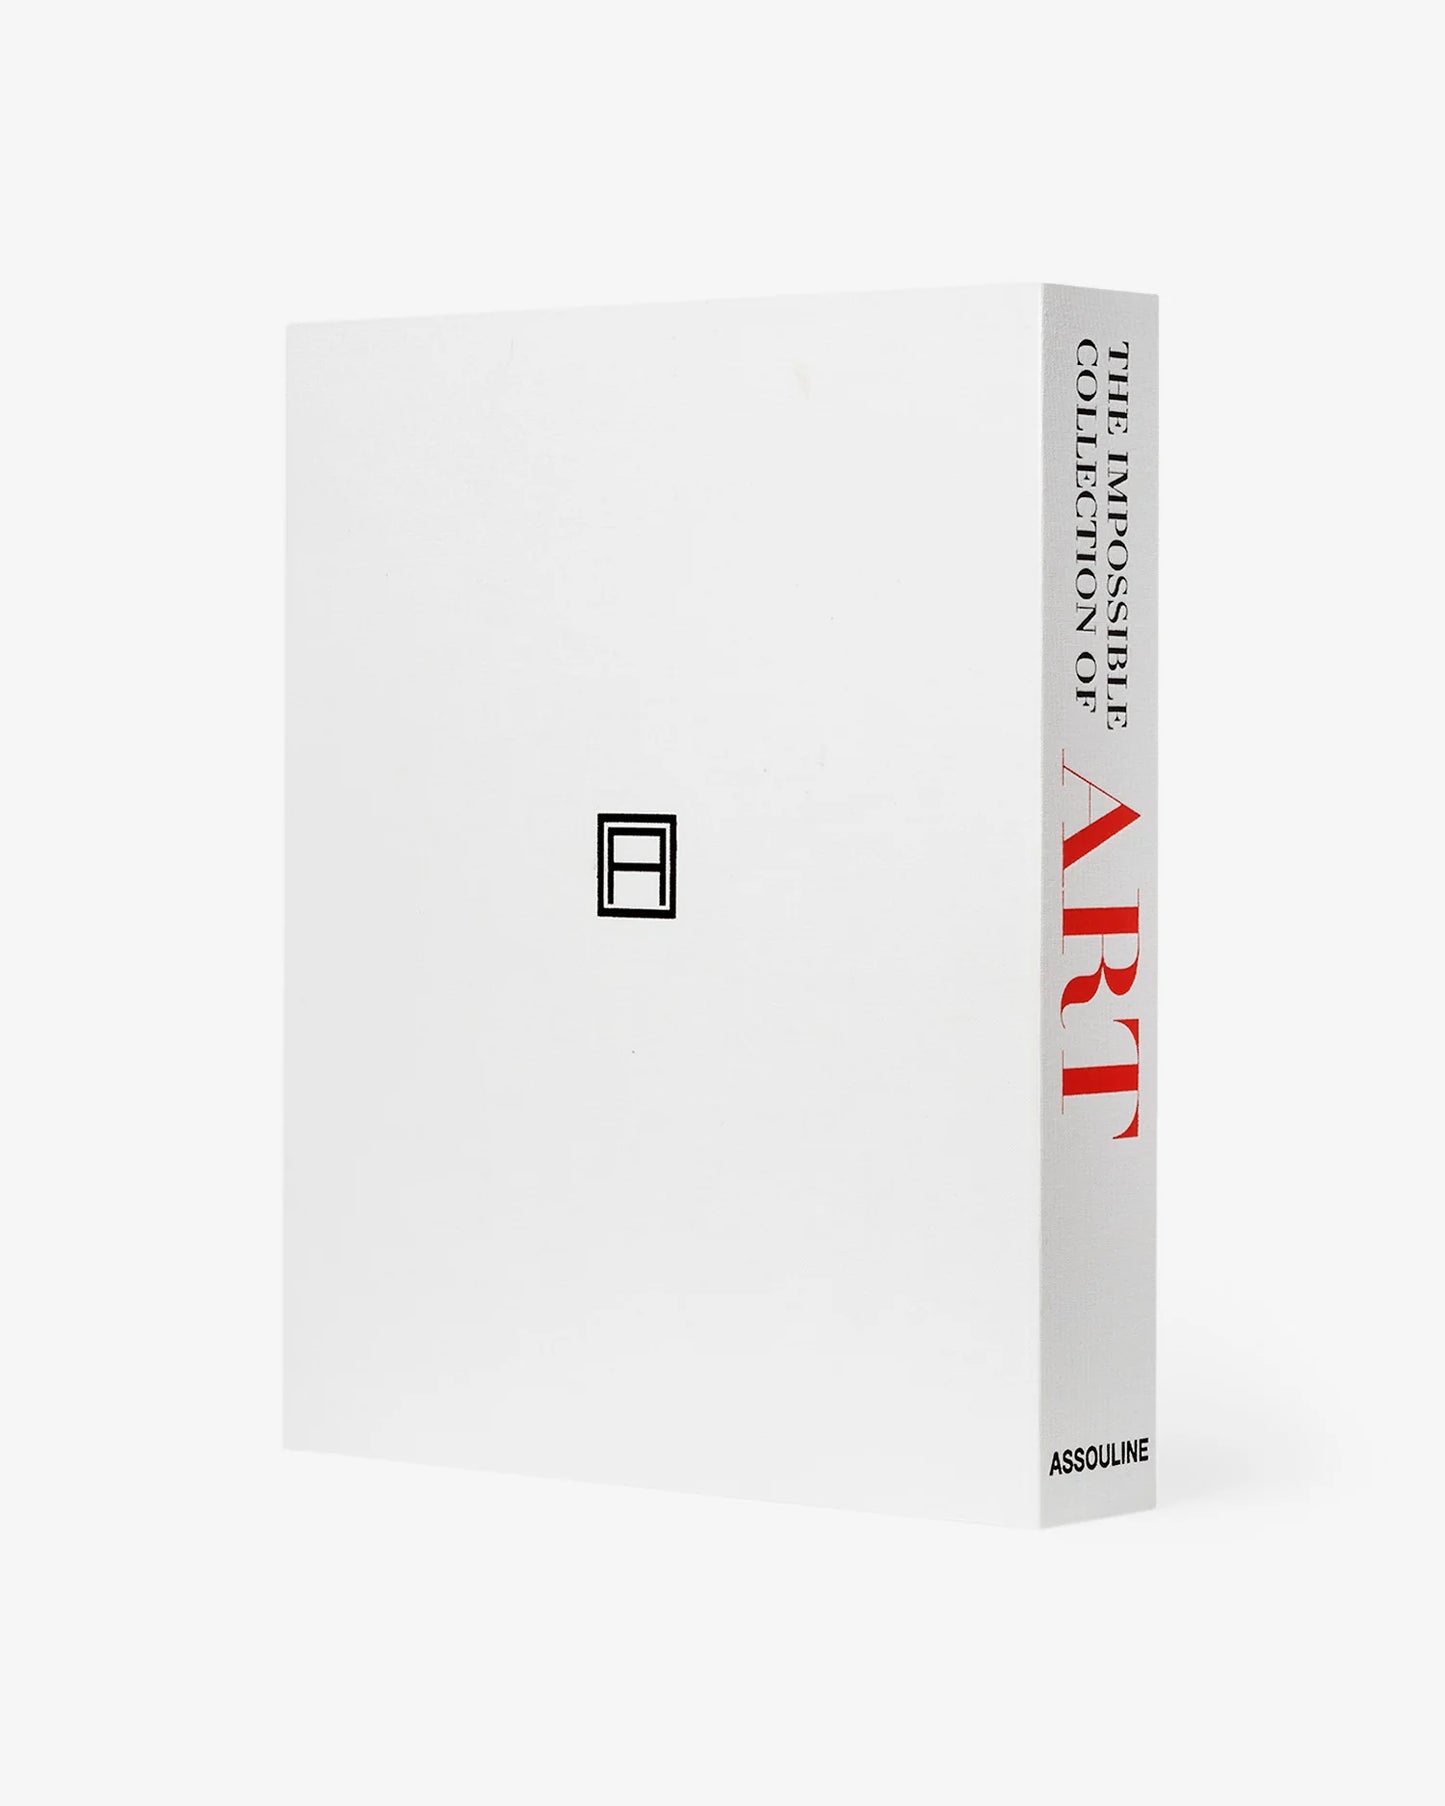 Livre Collection of Art (2nd Edition): Impossible Collection Assouline